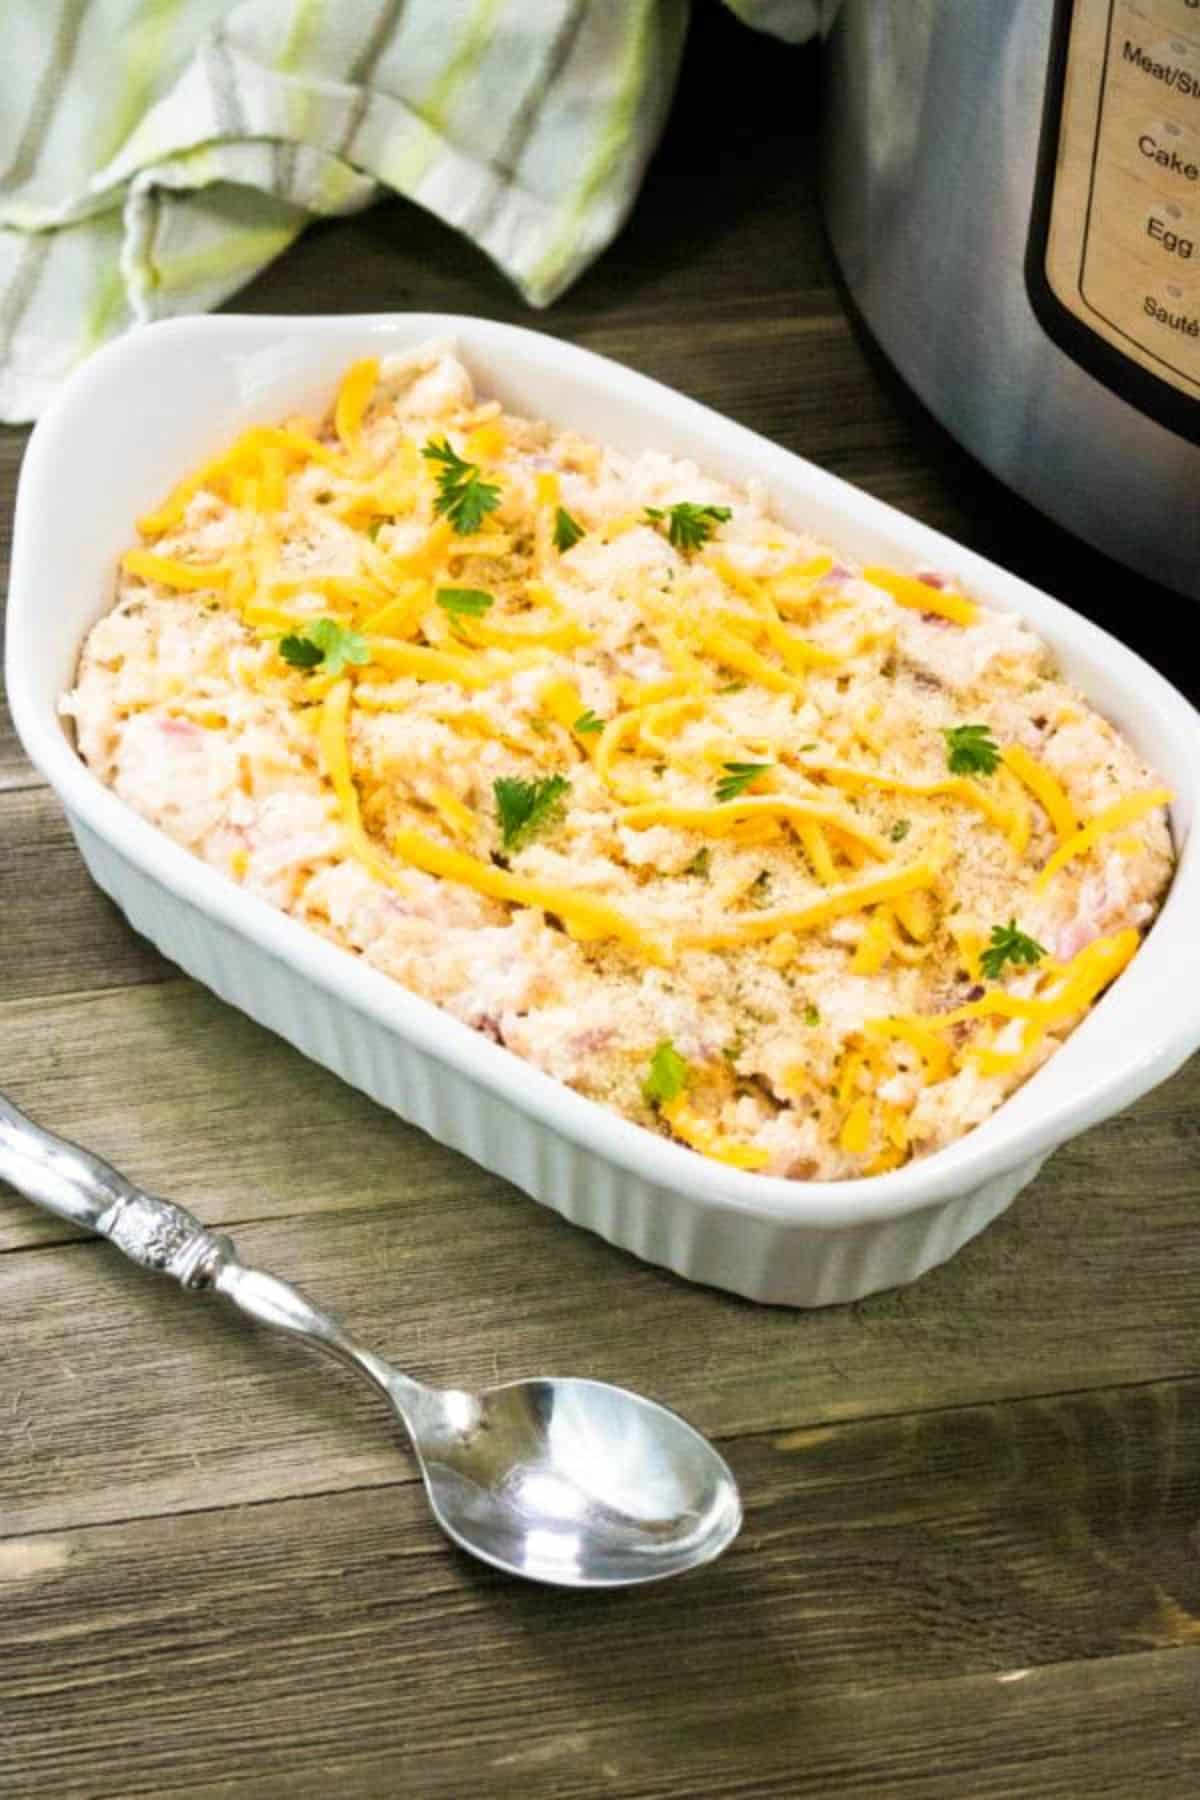 Instant Pot Cheesy Potatoes in a white baking dish on table next to Instant Pot and serving spoon.